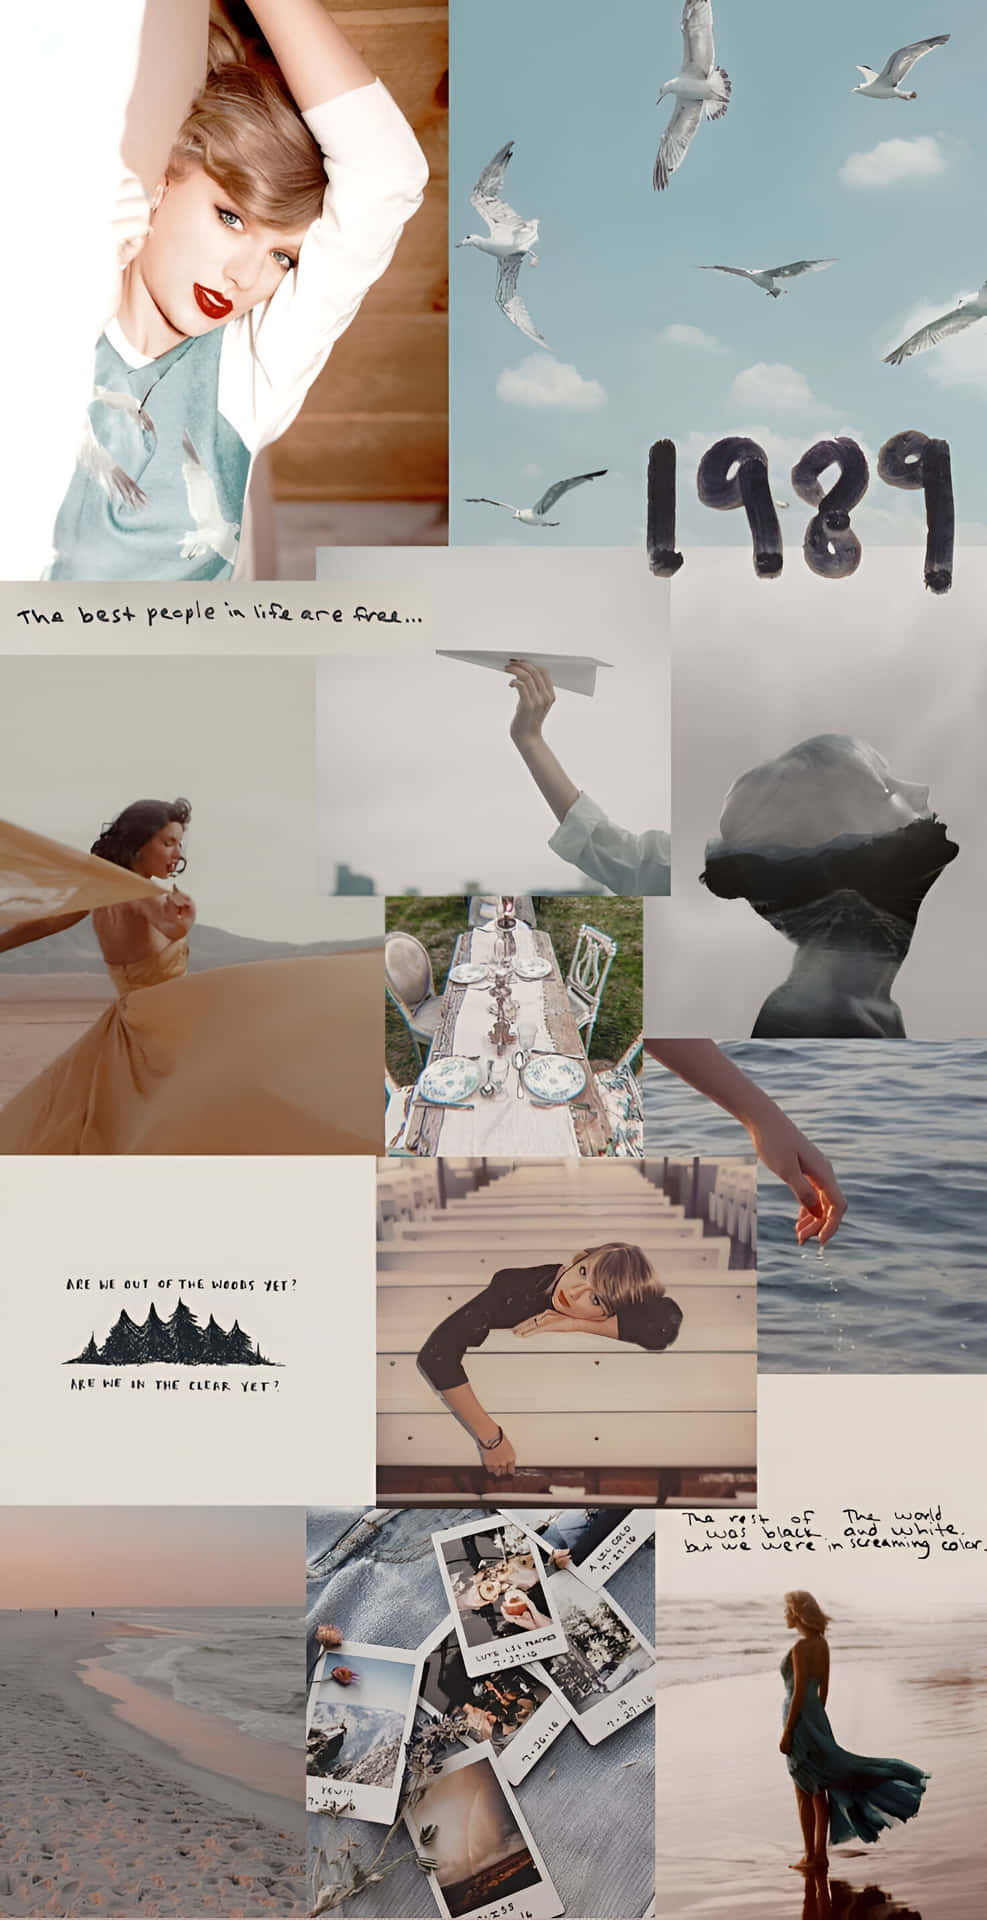 Taylor Swift1989 Inspired Collage Wallpaper